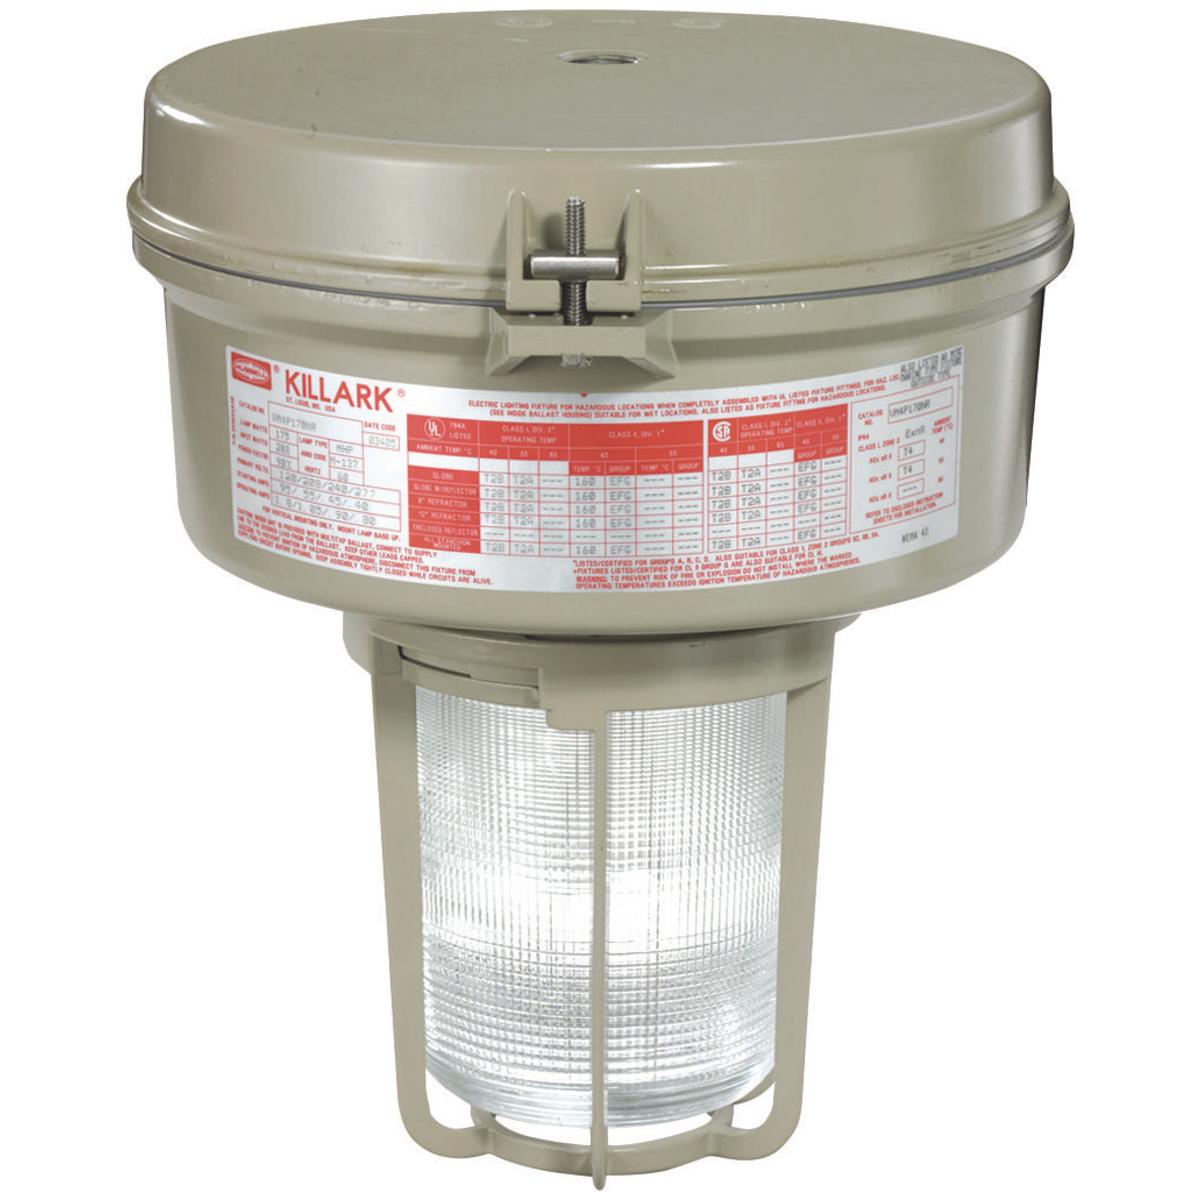 Hubbell VM3P200F2R1G VM3 Series - 200W Metal Halide Quadri-Volt - 3/4" Flexible Pendant - Type I Glass Refractor and Guard  ; Ballast tank and splice box – corrosion resistant copper-free aluminum alloy with baked powder epoxy/polyester finish, electrostatically applied for c